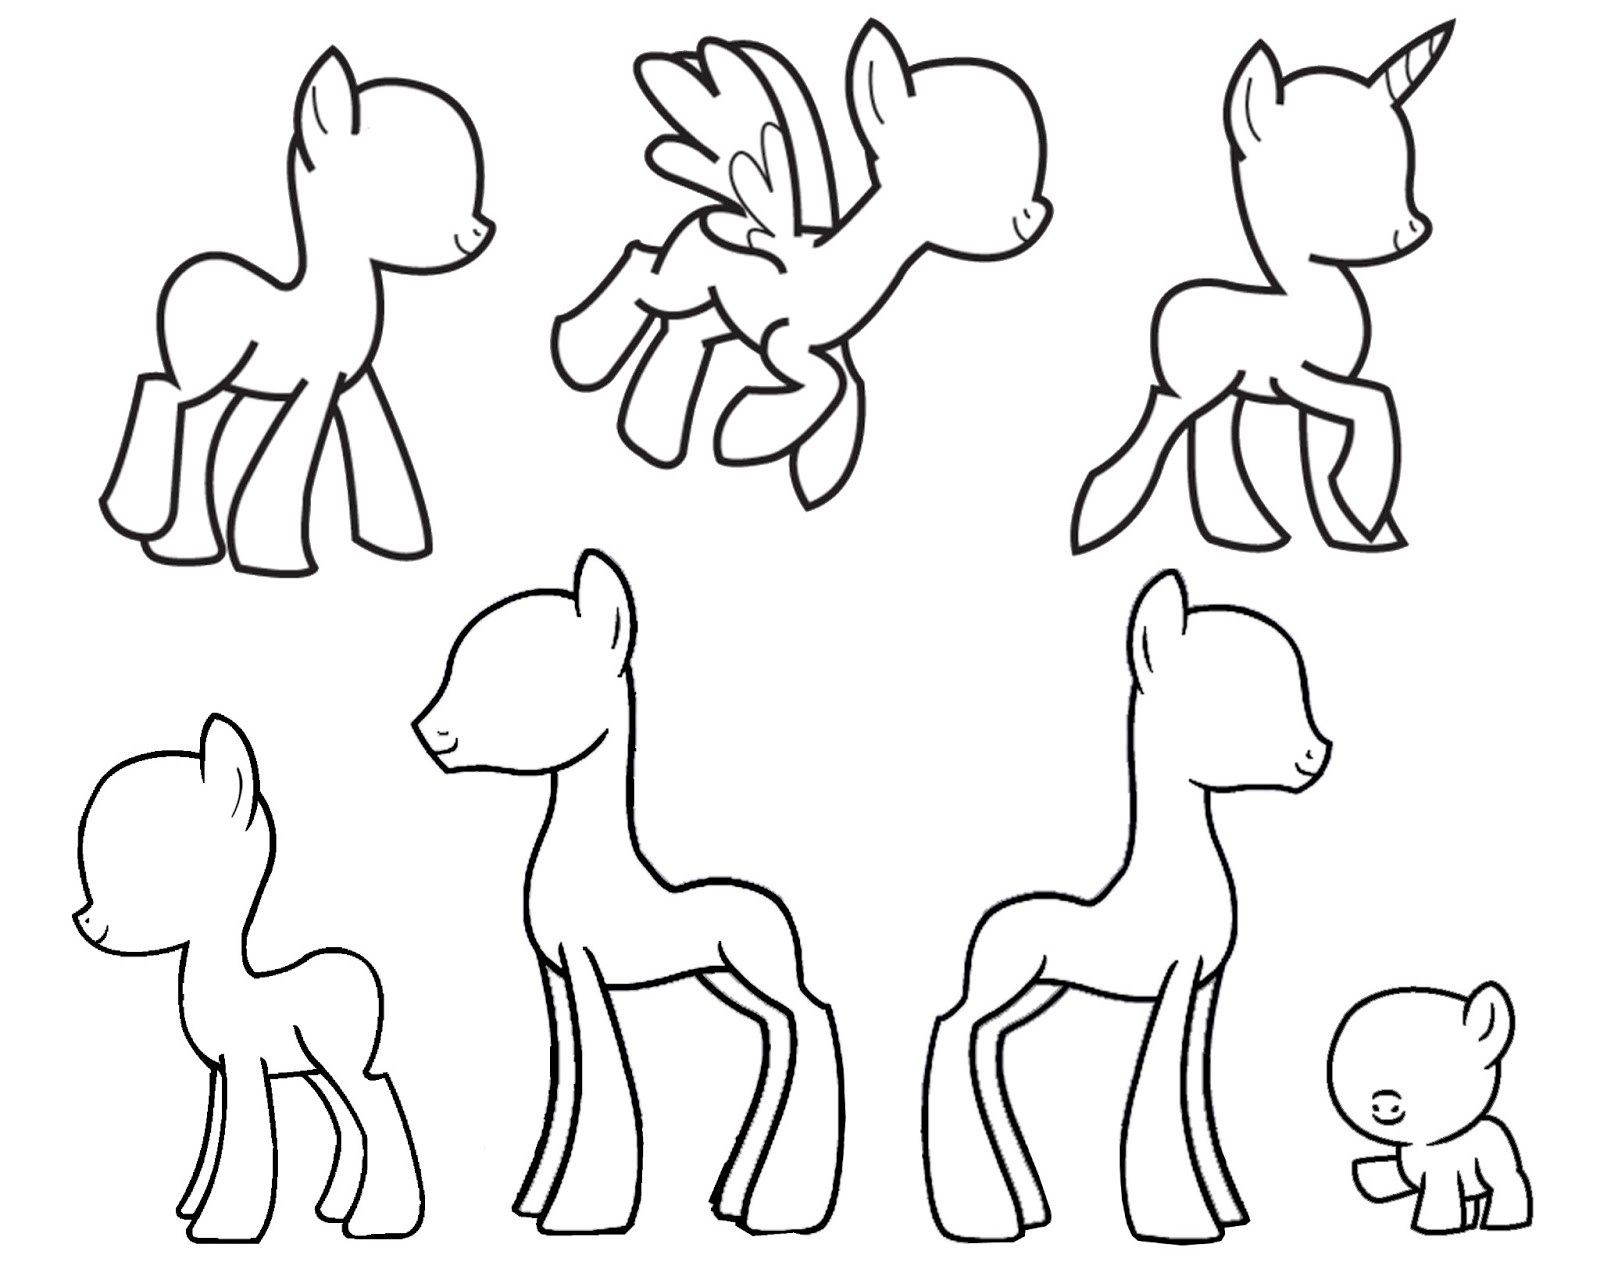 Doodlecraft Design and DRAW your own My Little Pony!